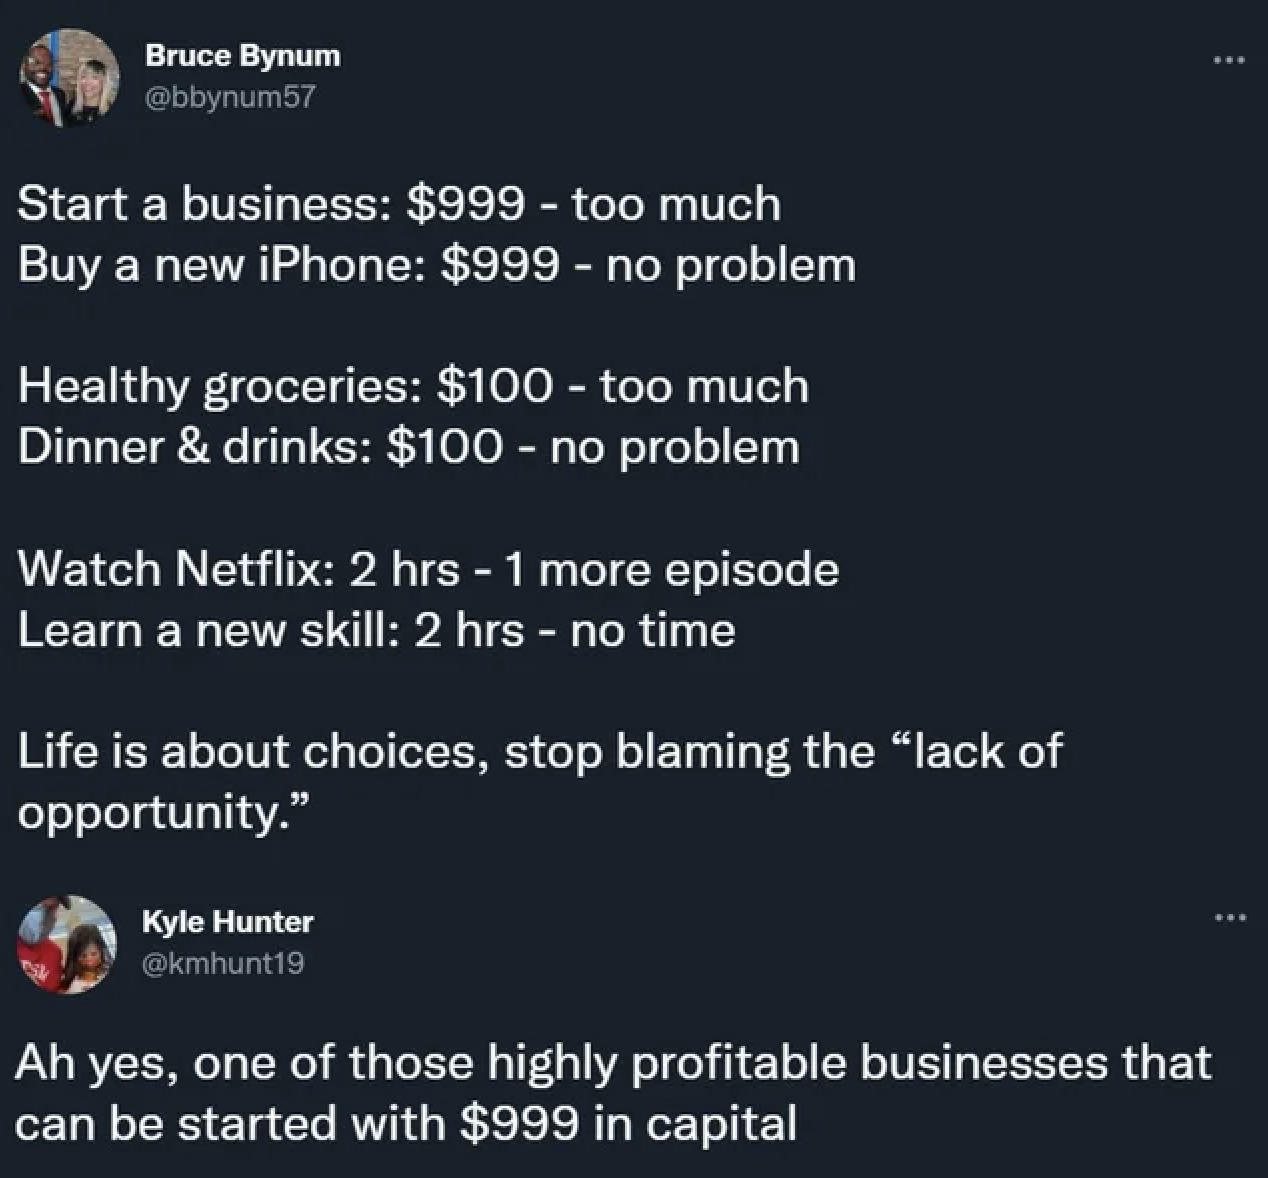 Start a business $999 too much Buy a new iPhone $999 no problem Healthy groceries $100 too much Dinner & drinks $100 no problem Watch Netflix 2 hrs 1 more episode Learn a new skill 2 hrs no time Life is about choices, stop blaming